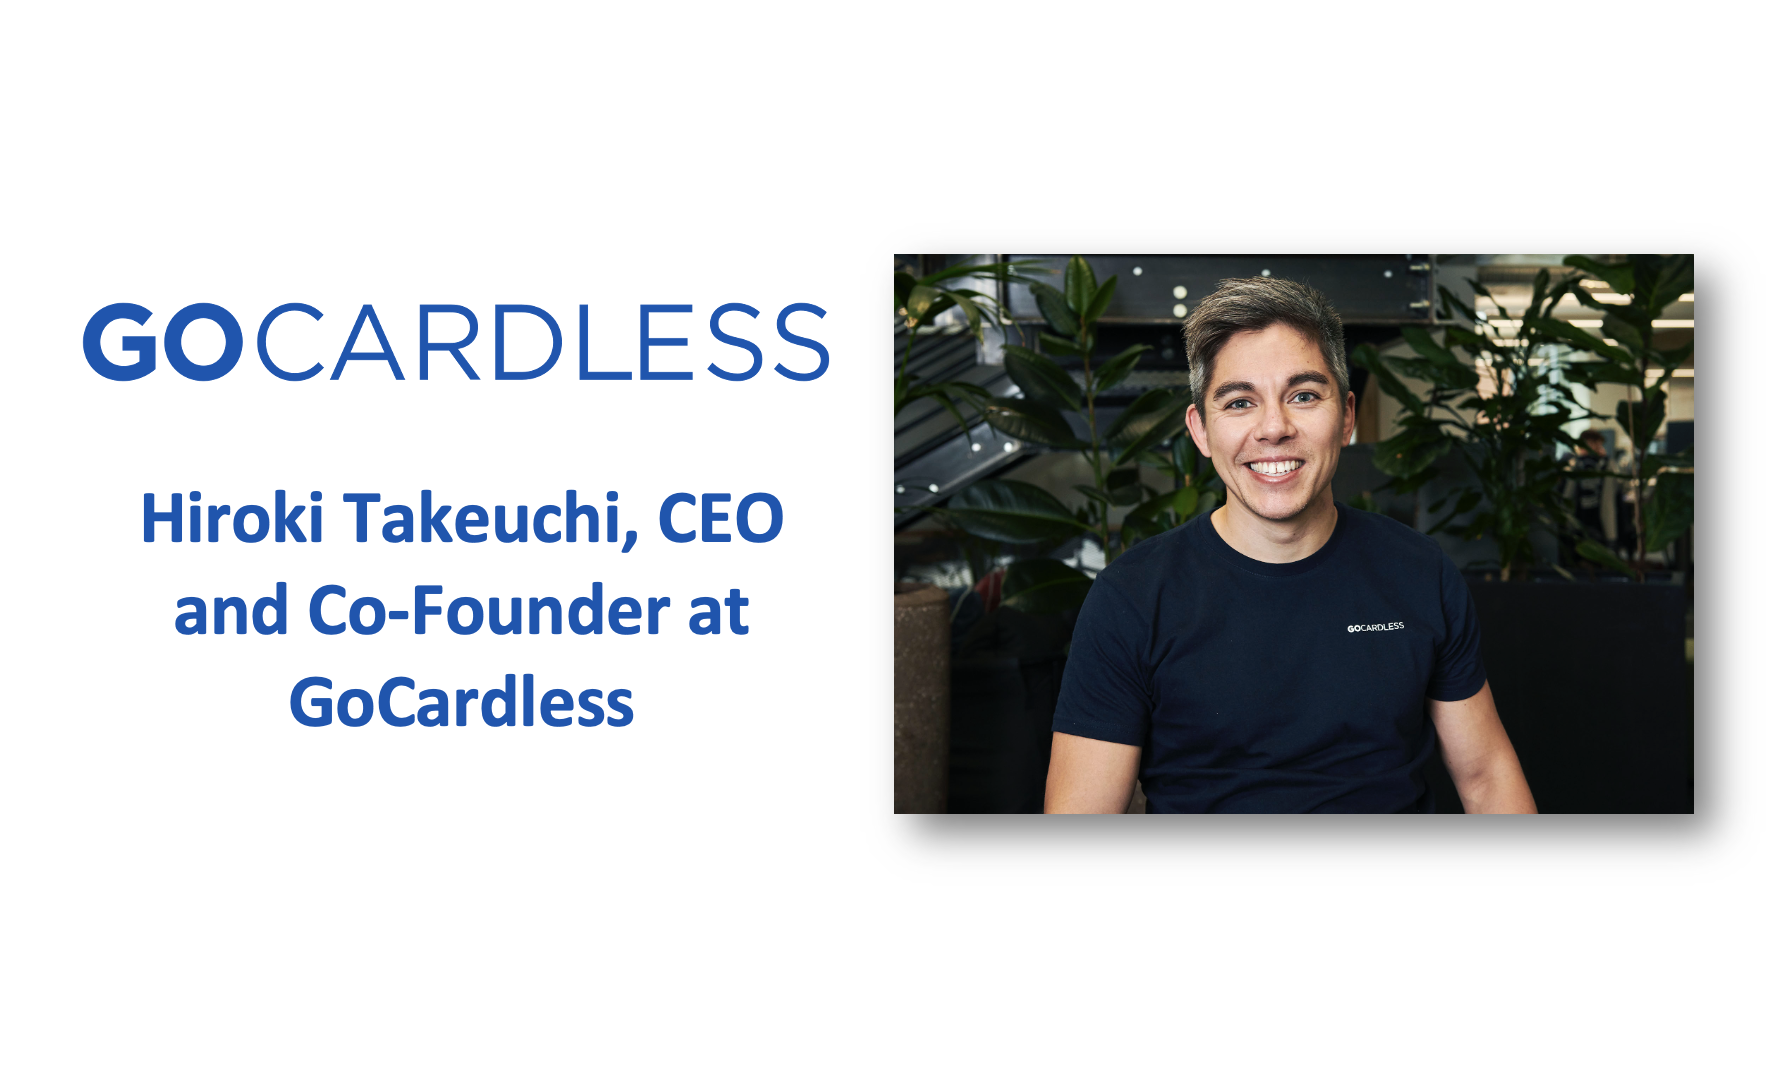 Interview with Hiroki Takeuchi, CEO and Co-founder at GoCardless